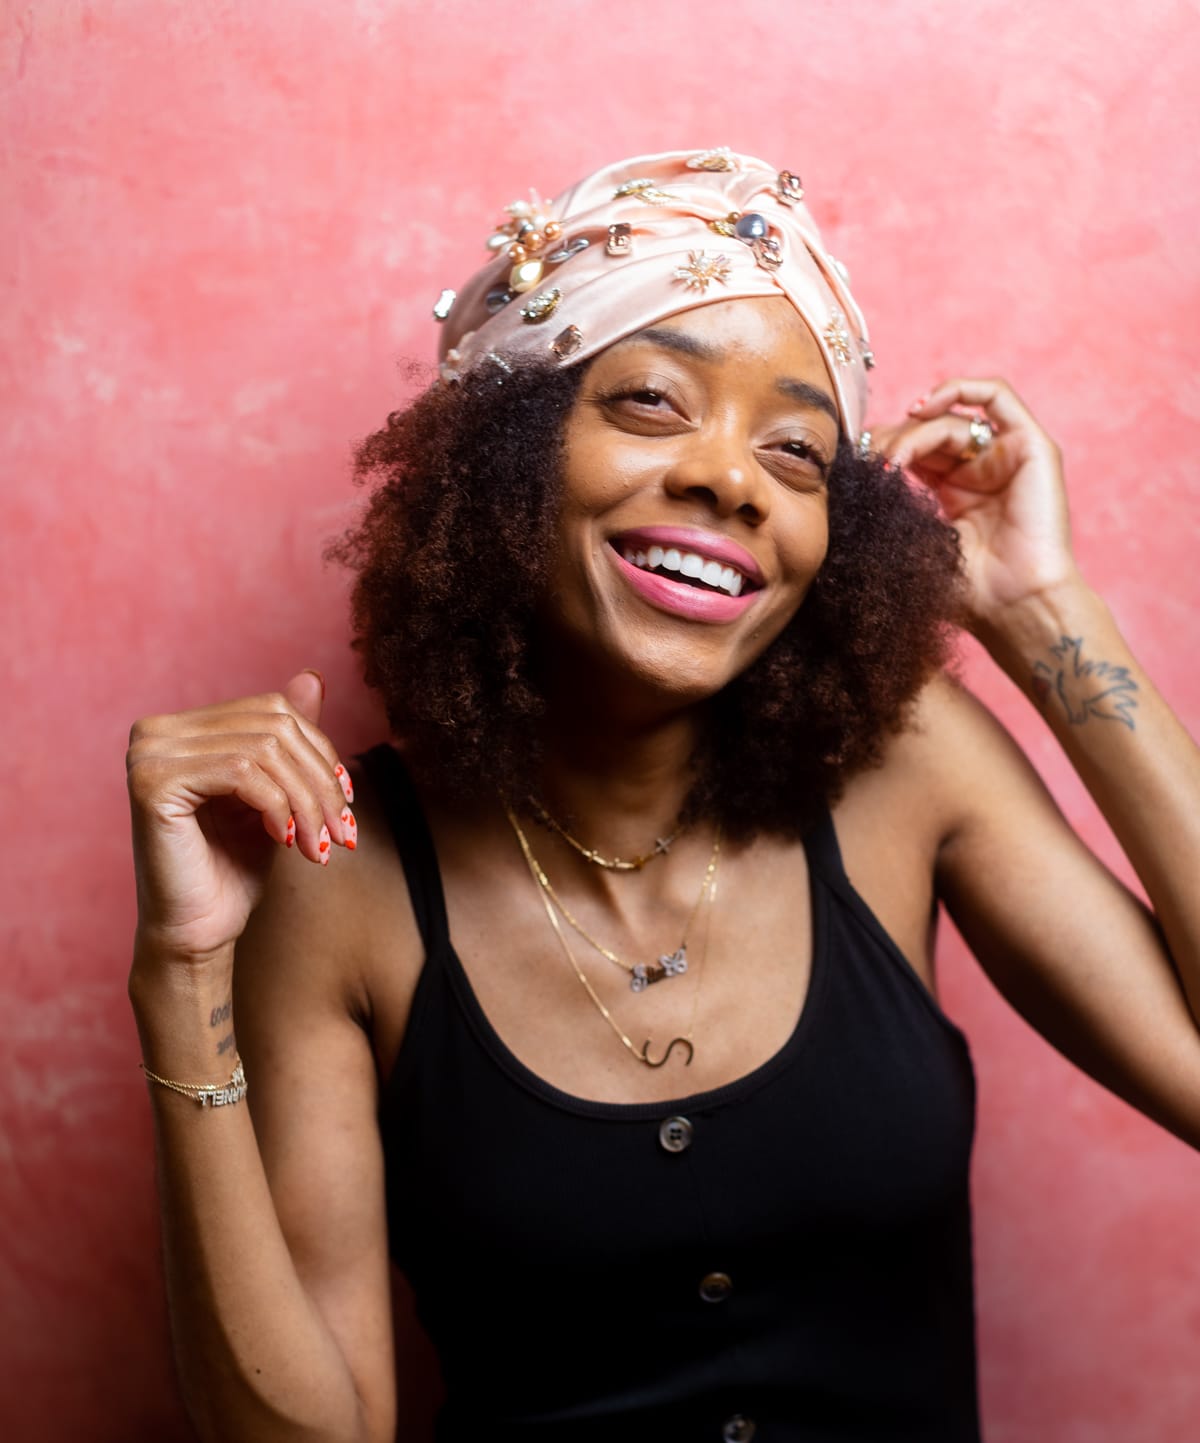 Shanika smiling in a black tank and a jeweled head wrap